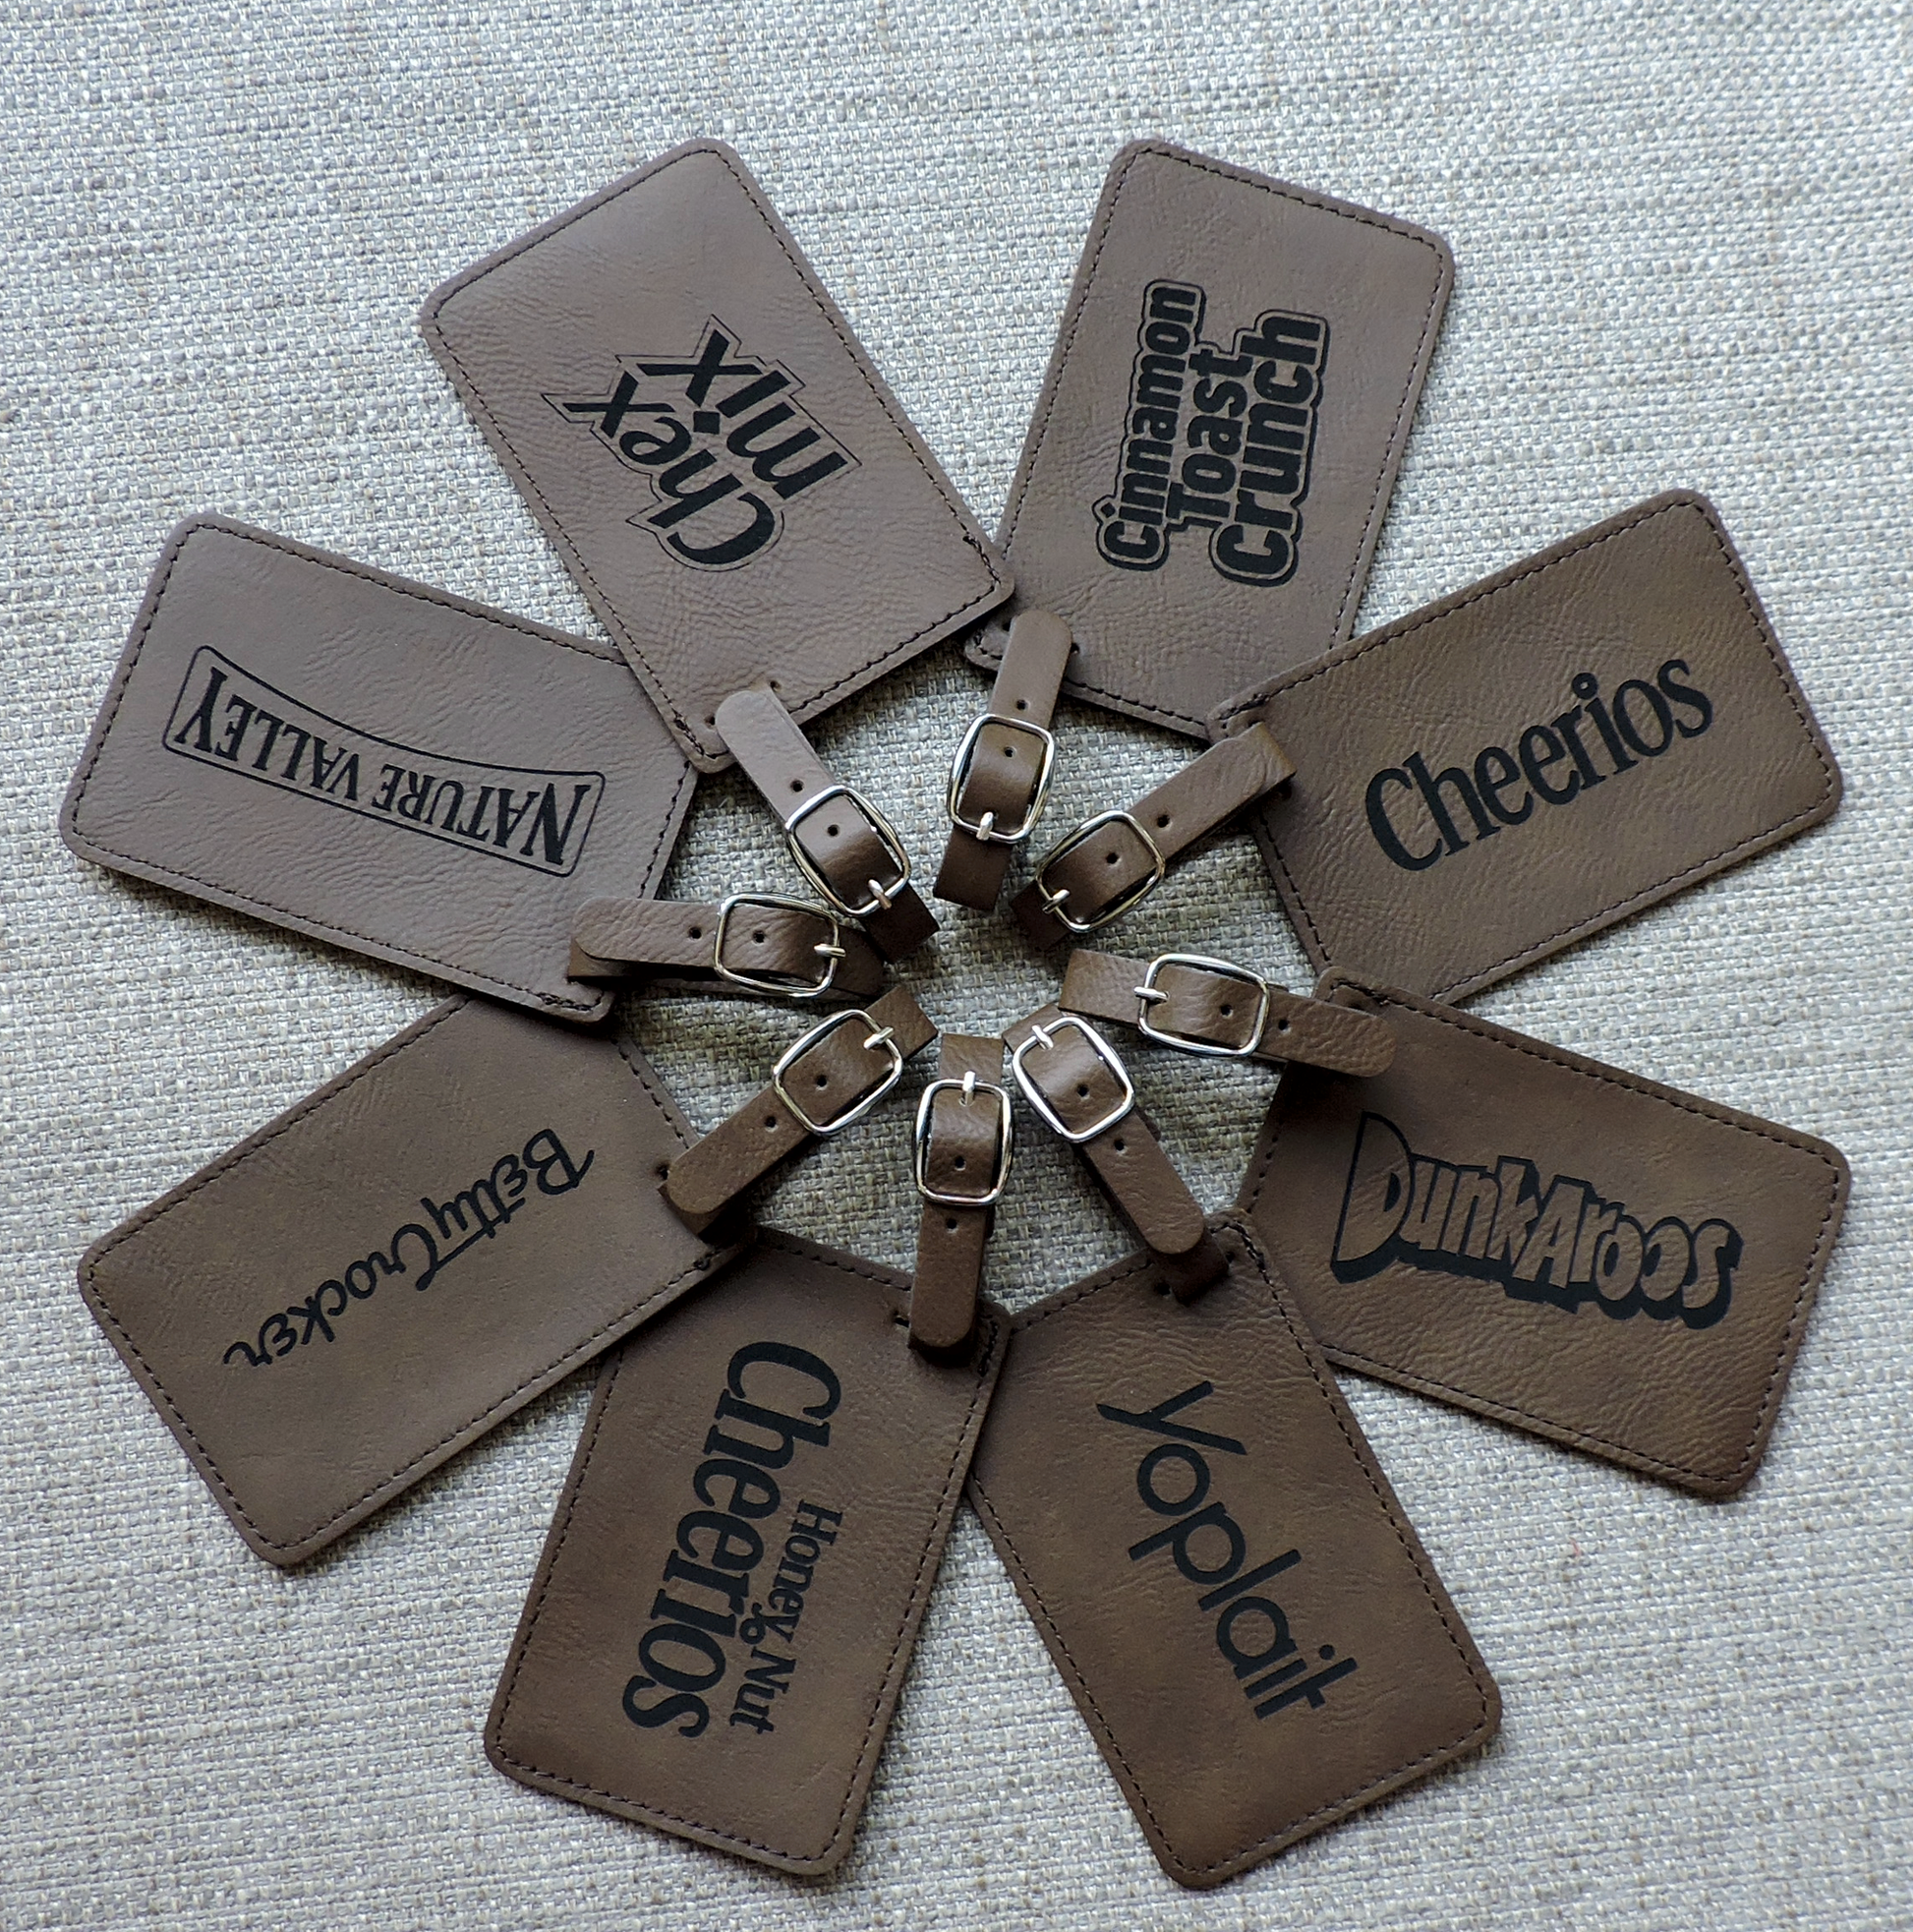 Personalized Bag Tags in Gray - Add Name And Quote